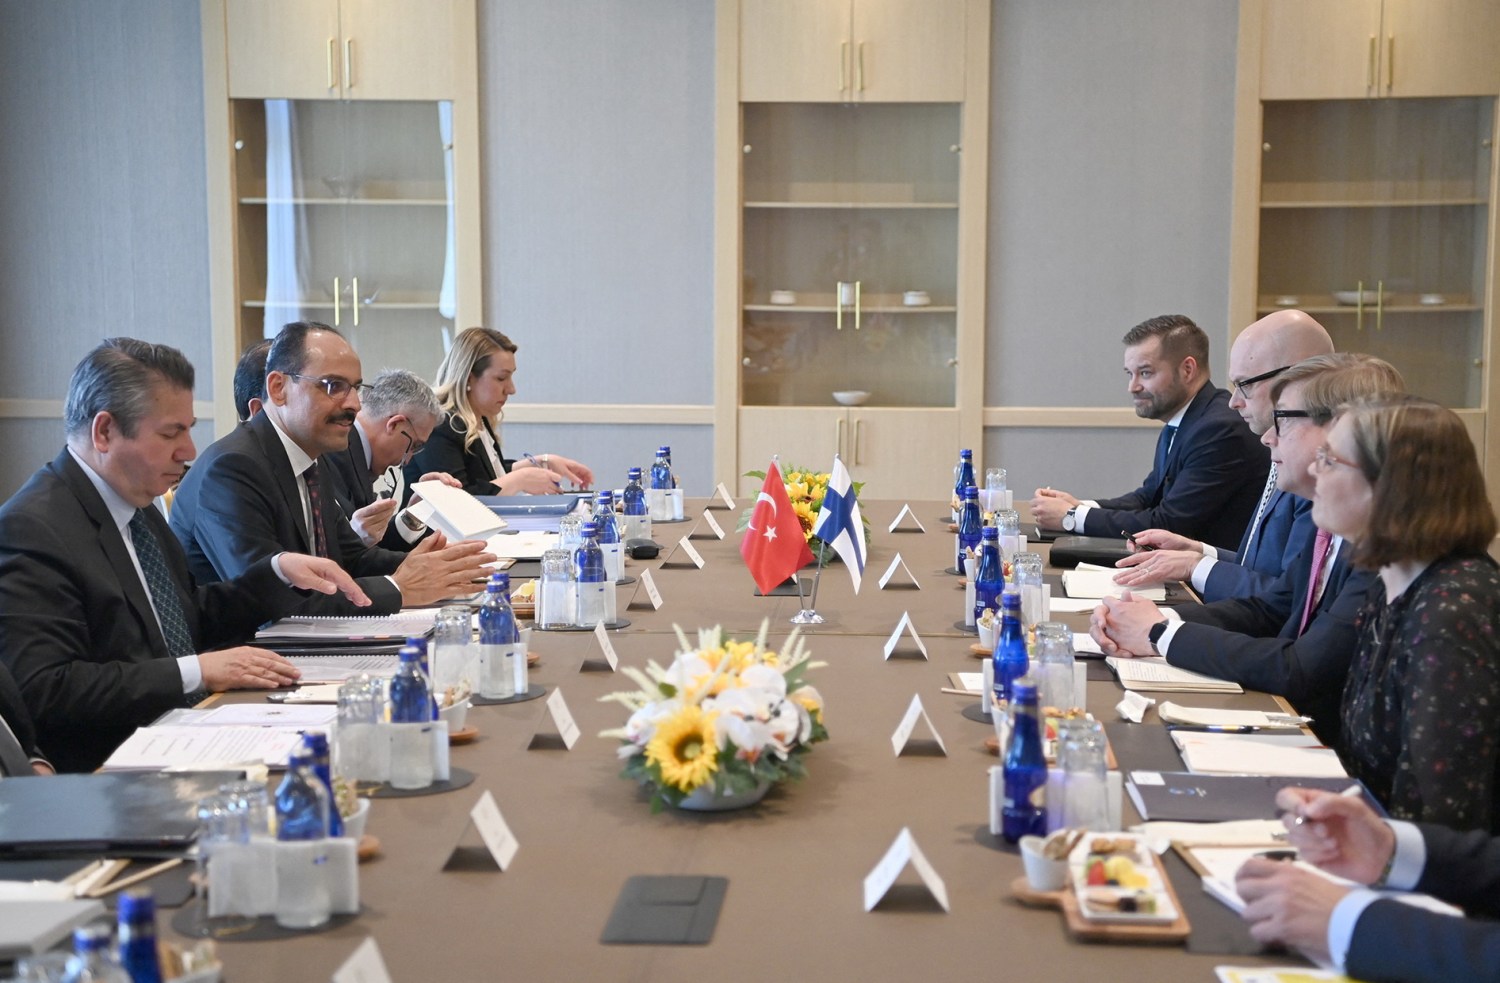 Ibrahim Kalin, Turkish President Tayyip Erdogan's spokesman and chief foreign policy adviser, meets with Finnish delegation led by the State Secretary at the Ministry of Foreign Affairs Jukka Salovaara, amid Russia's invasion of Ukraine, in Ankara, Turkey May 25, 2022. Presidential Press Office/Handout via REUTERS